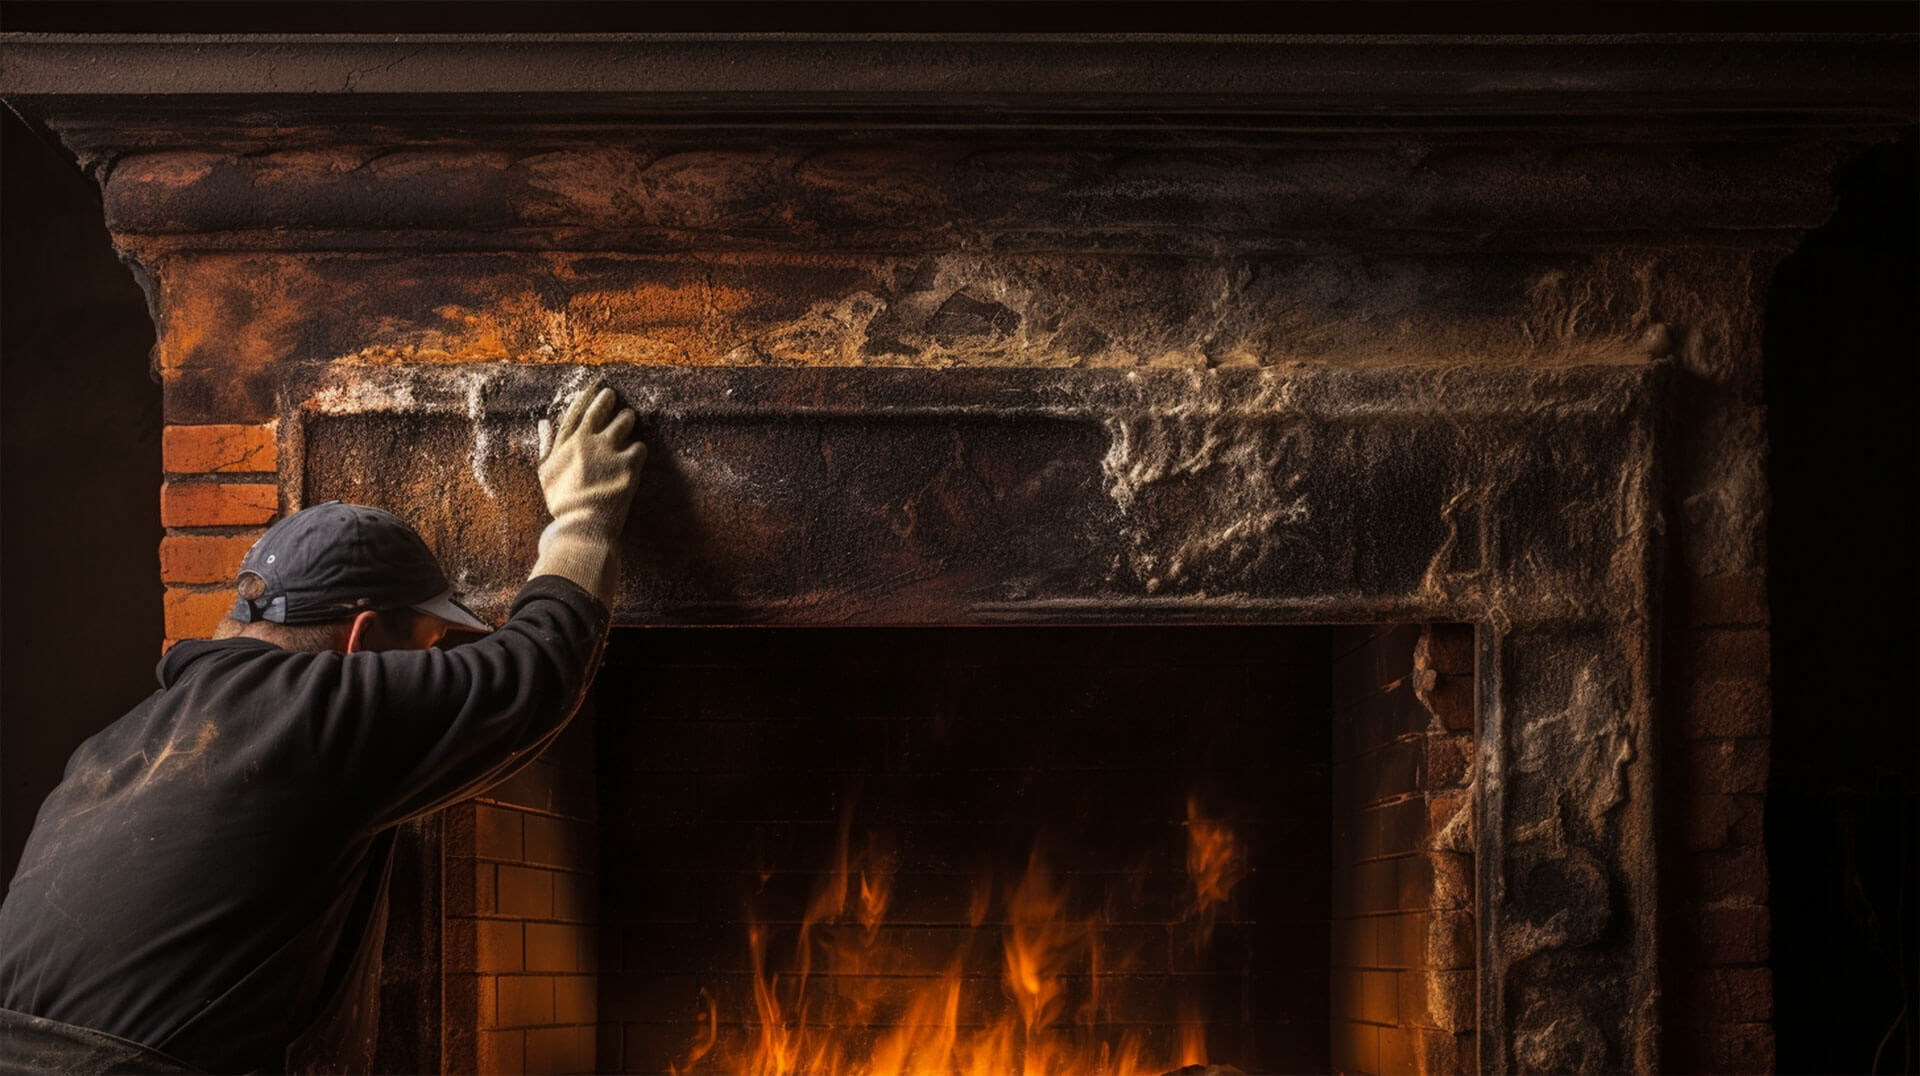 gloved hands diligently scrubbing the intricate crevices and textured surface of a brick fireplace